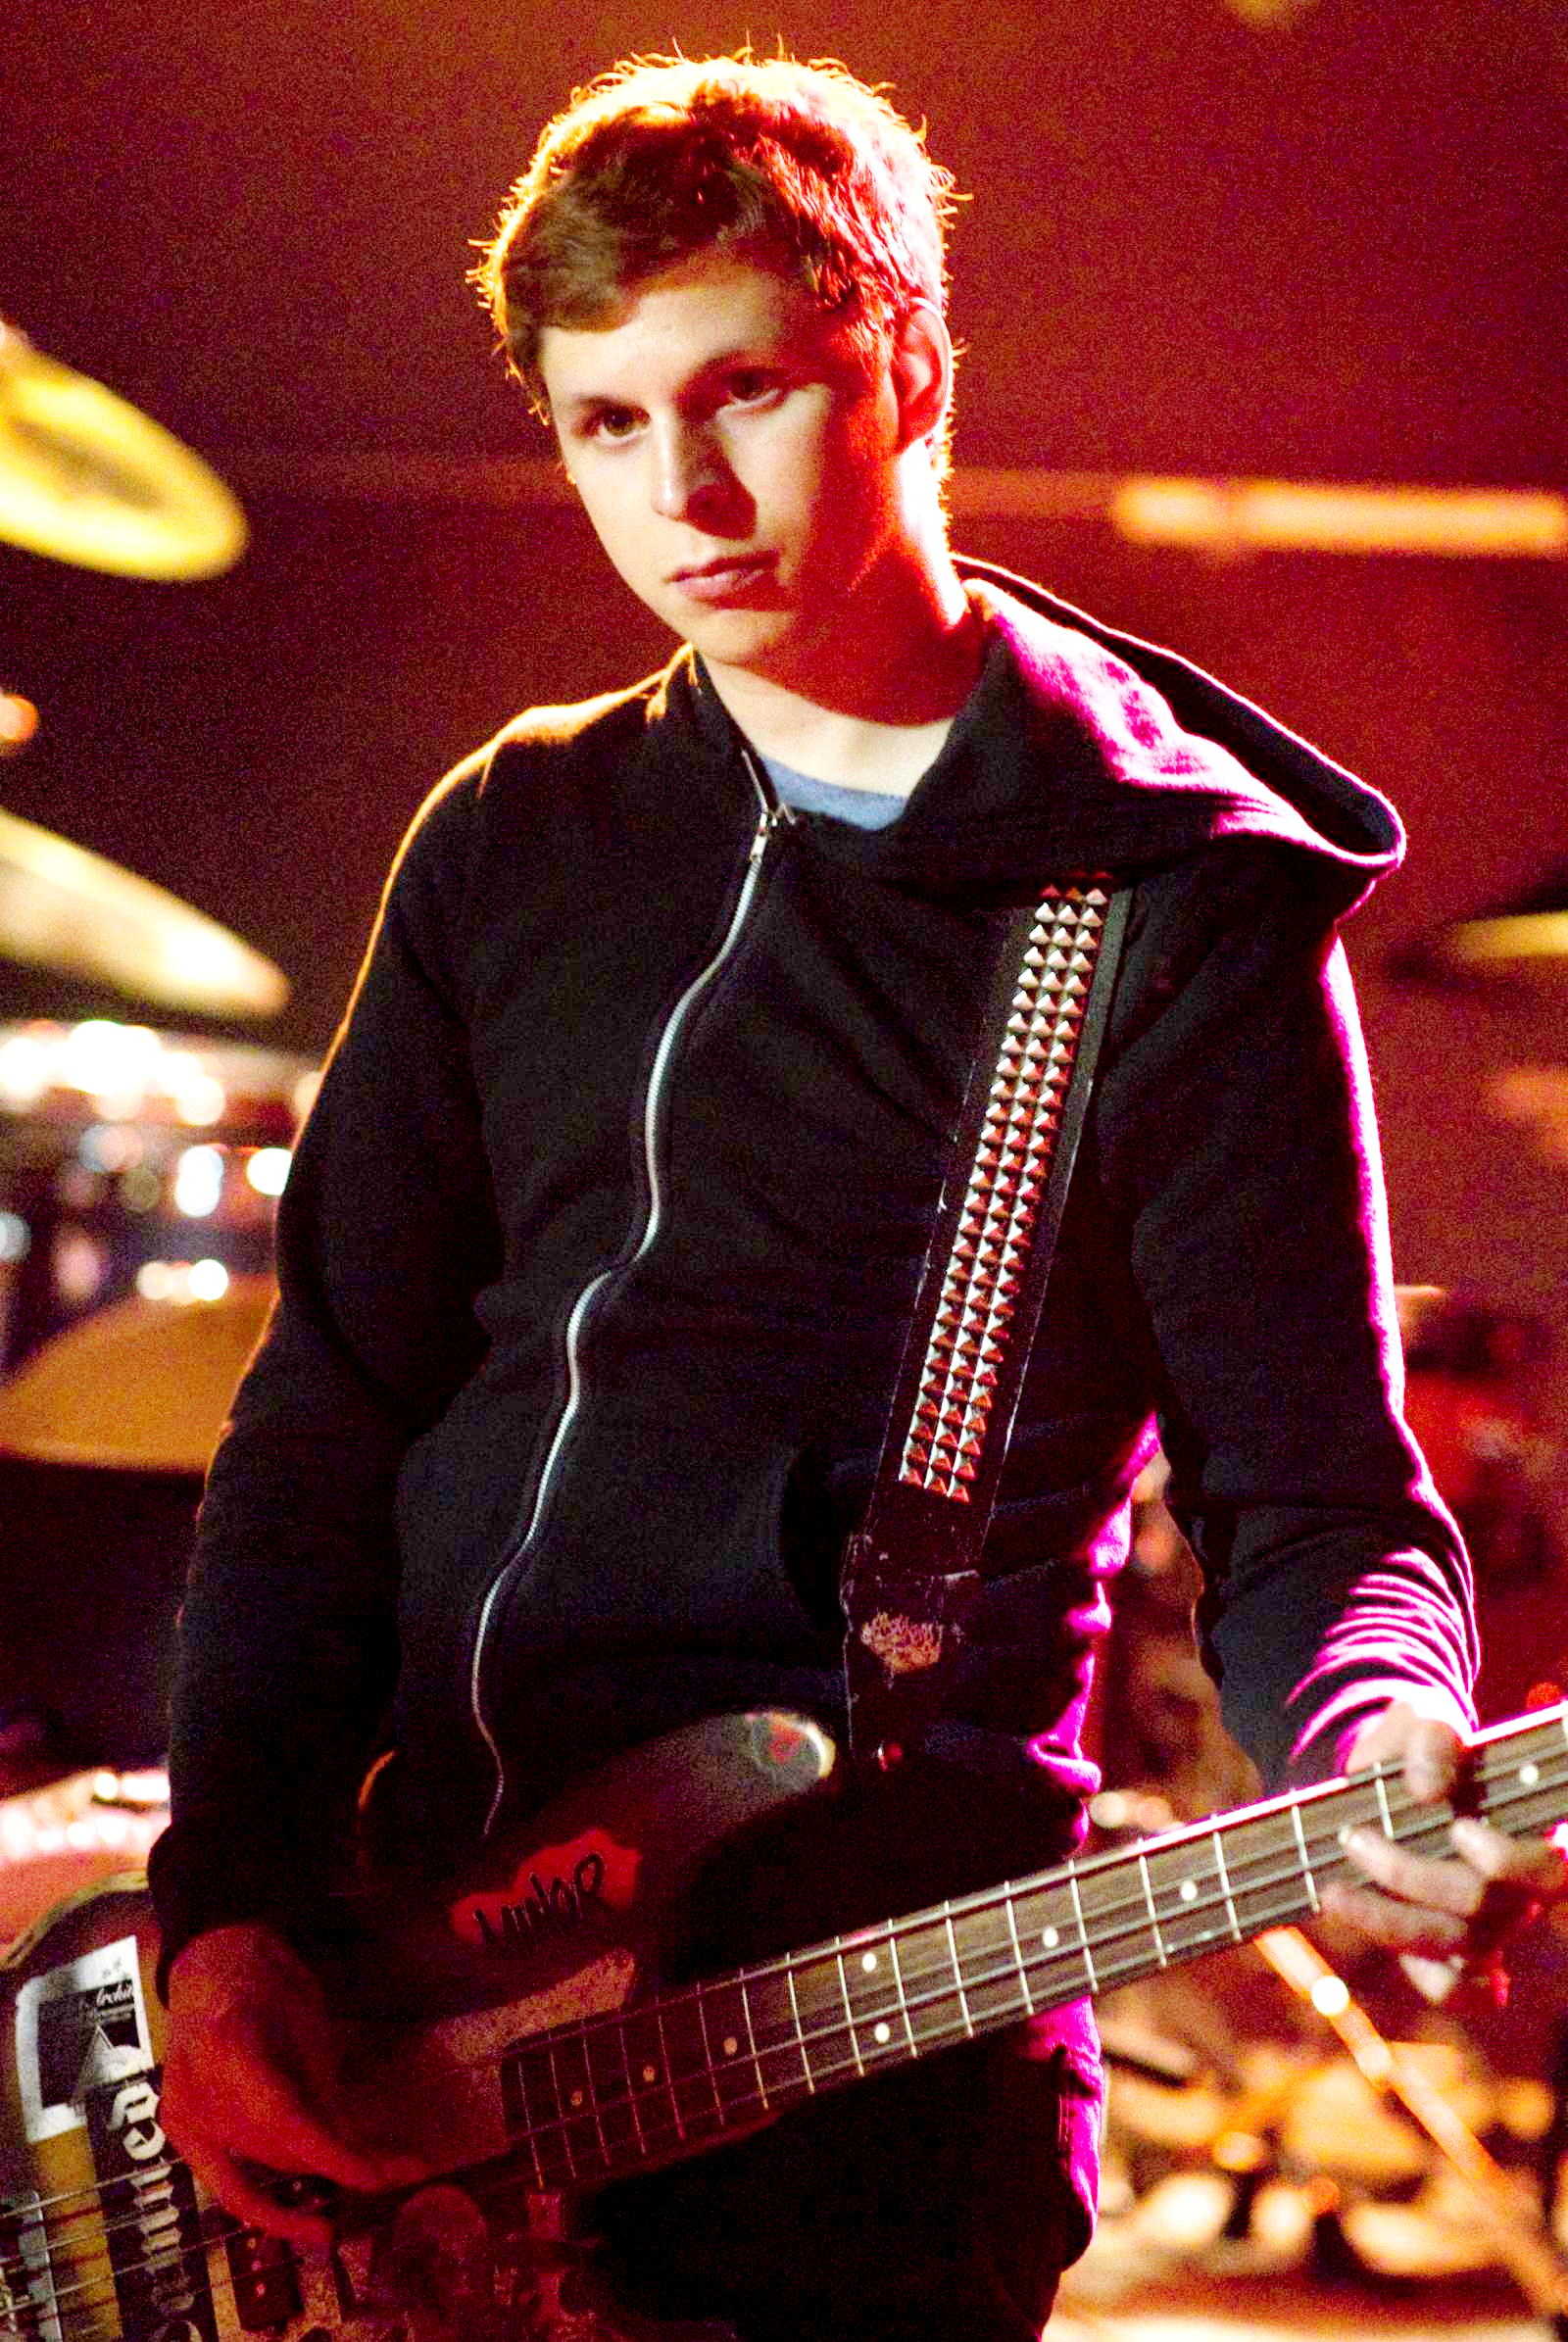 Michael Cera stars as Nick in Sony Pictures' Nick and Norah's Infinite Playlist (2008). Photo credit by JoJo Whilden.